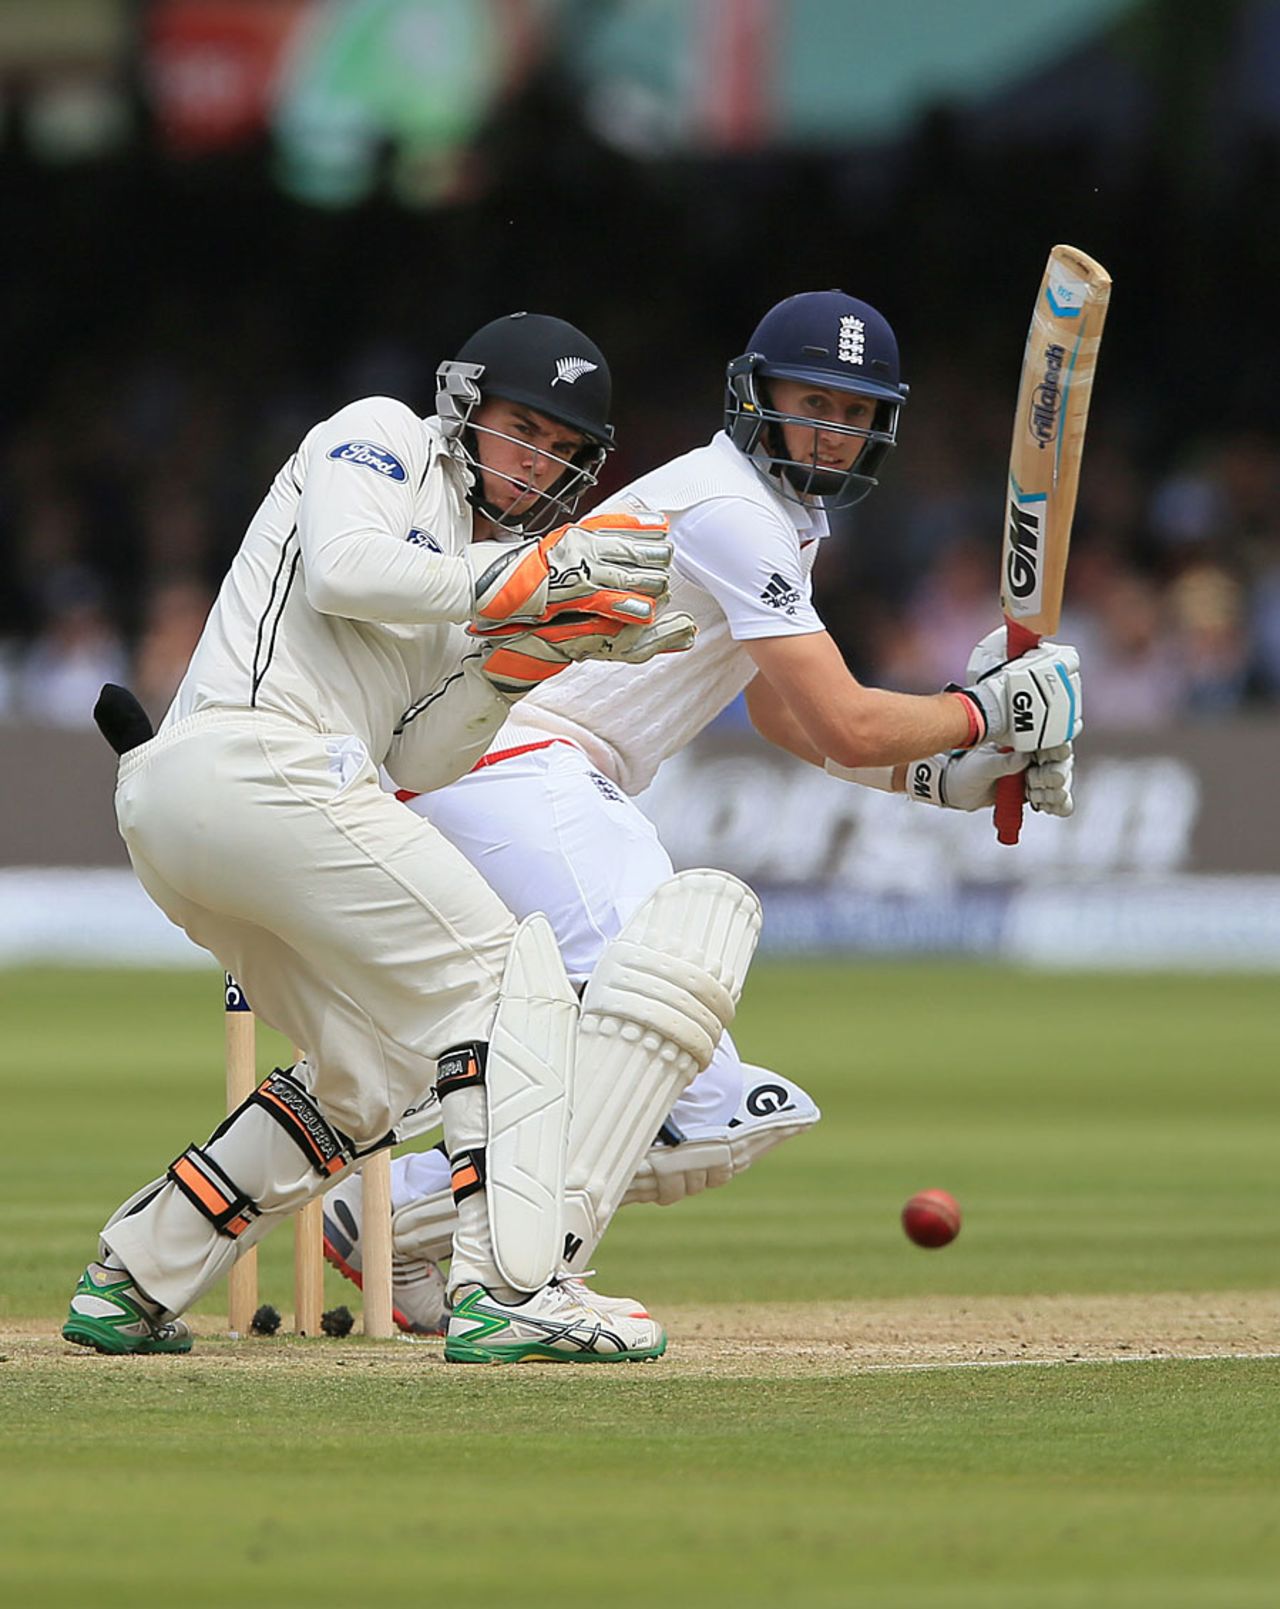 Joe Root guides the ball behind square, England v New Zealand, 1st Investec Test, Lord's, 4th day, May 24, 2015